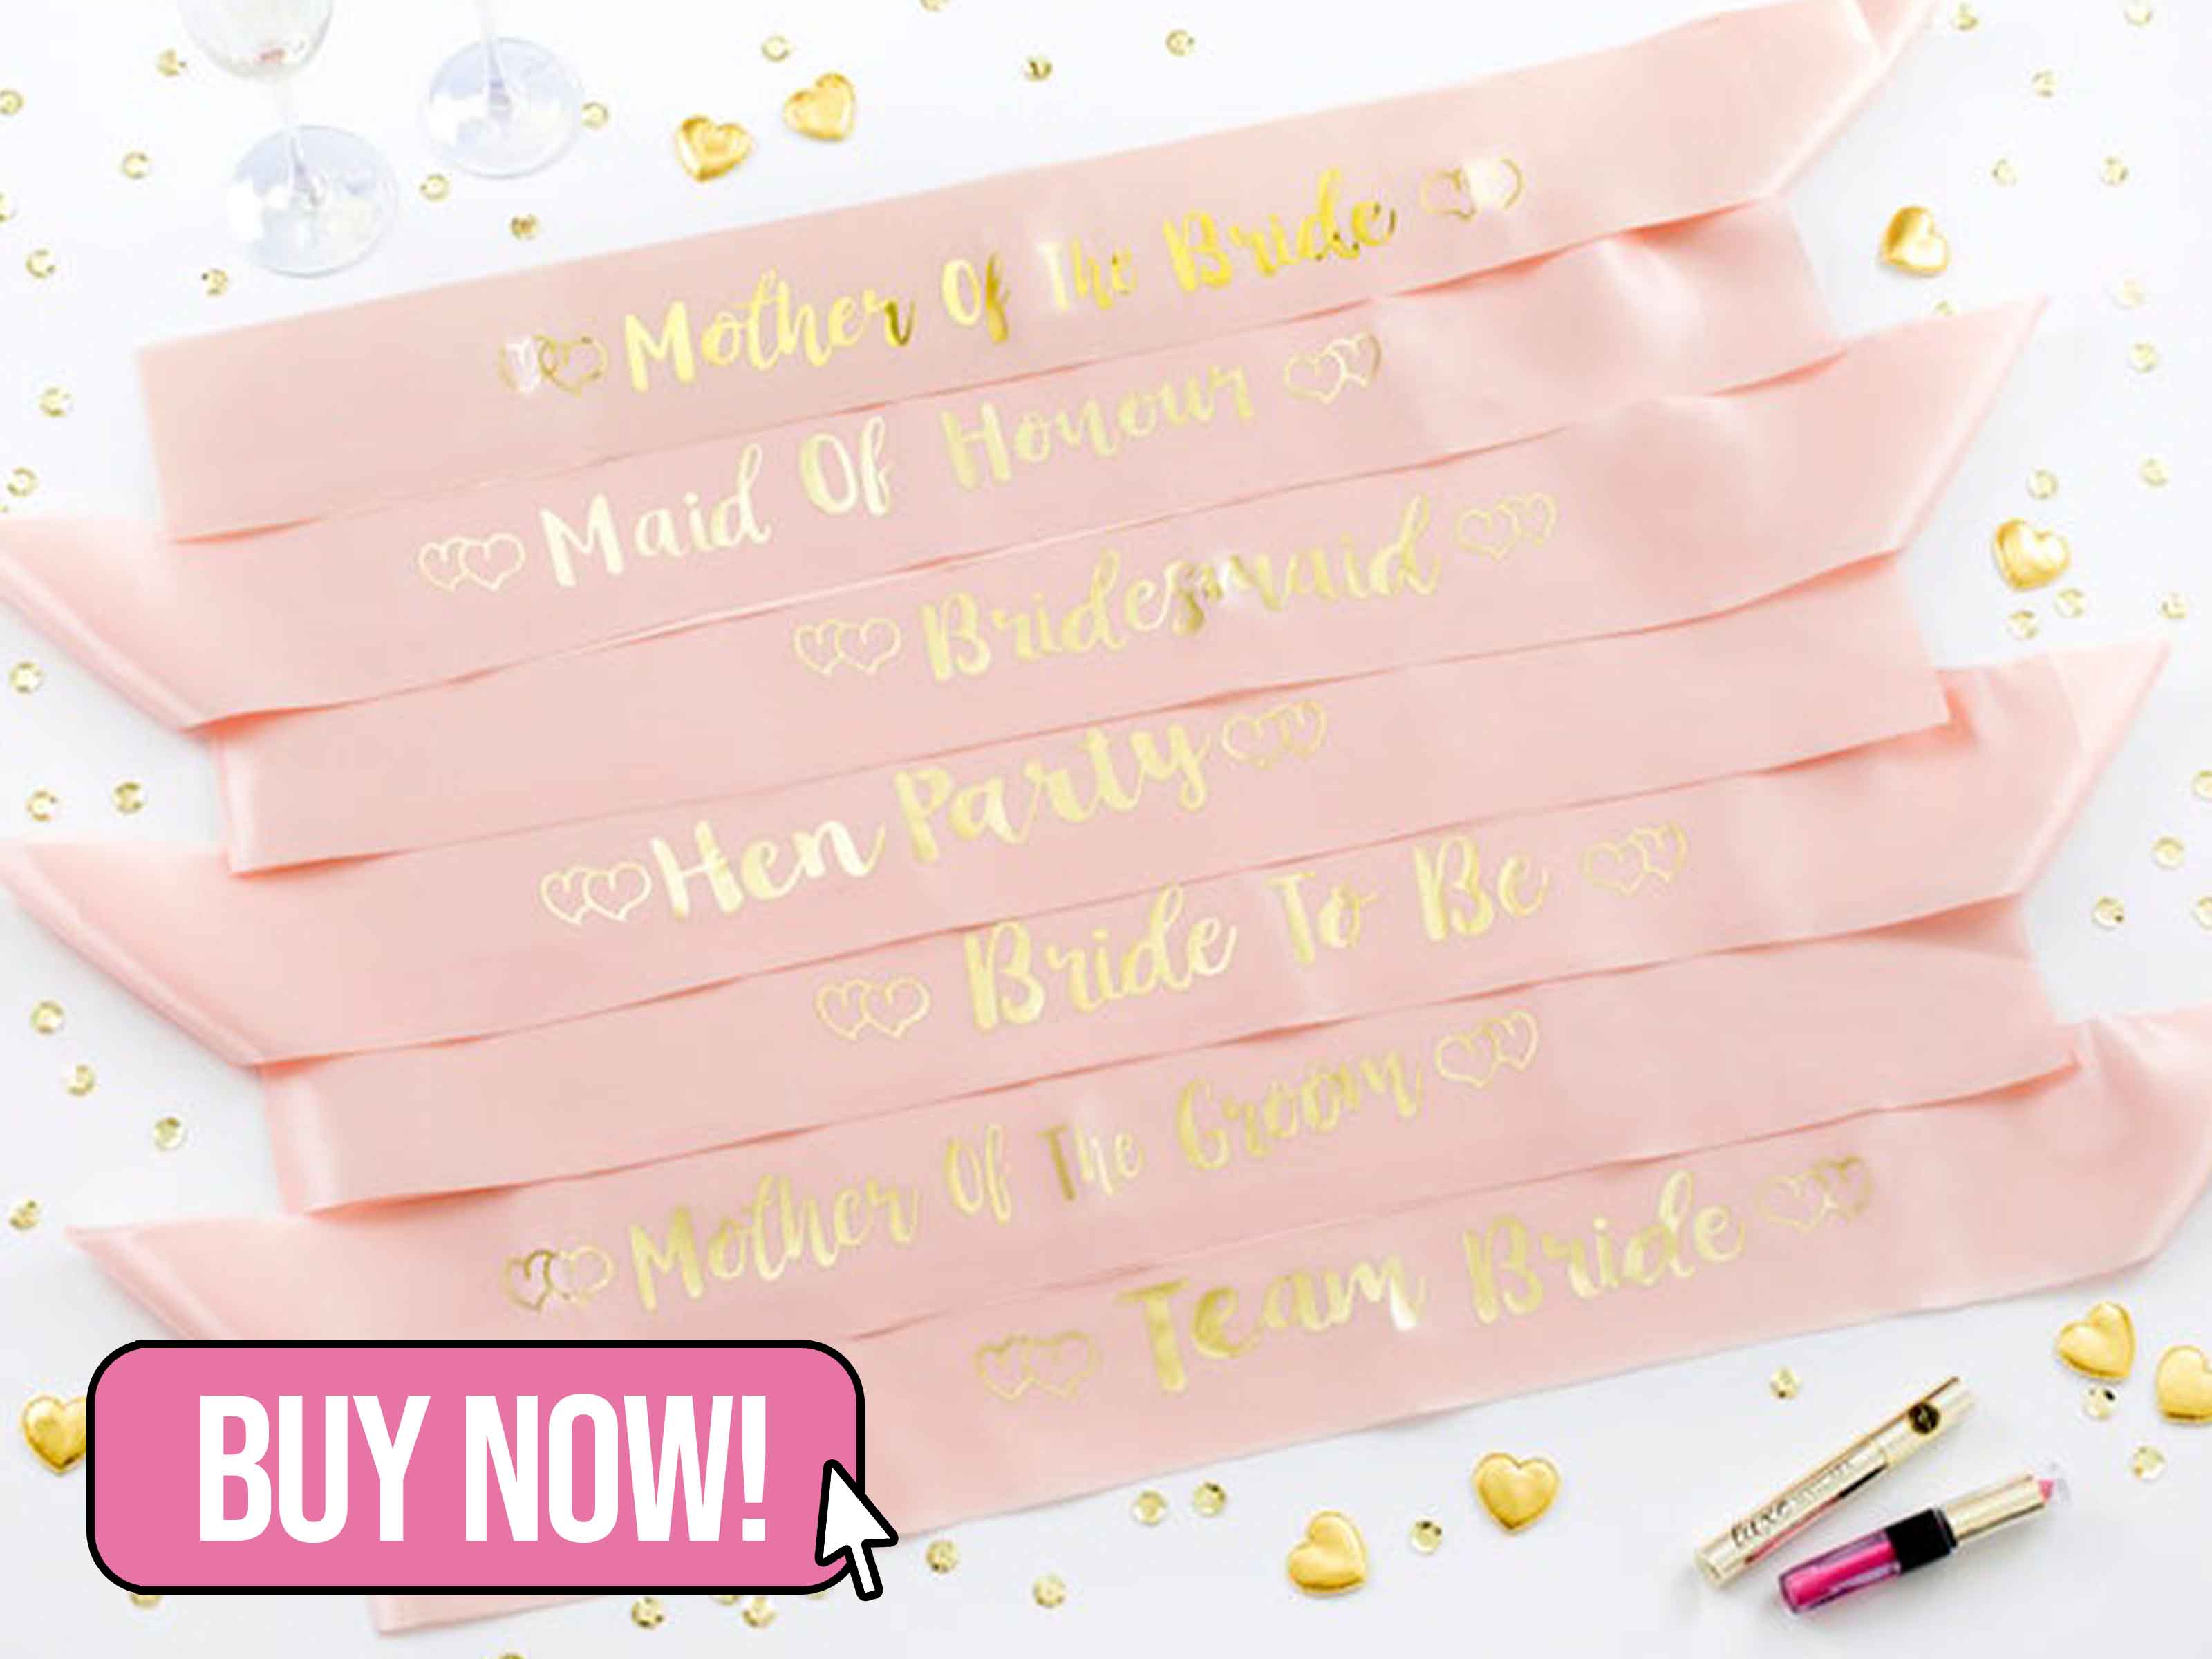 Hen Night Pink Sash bride Accessories Party Sashes Girls Night Out Wedding Maid